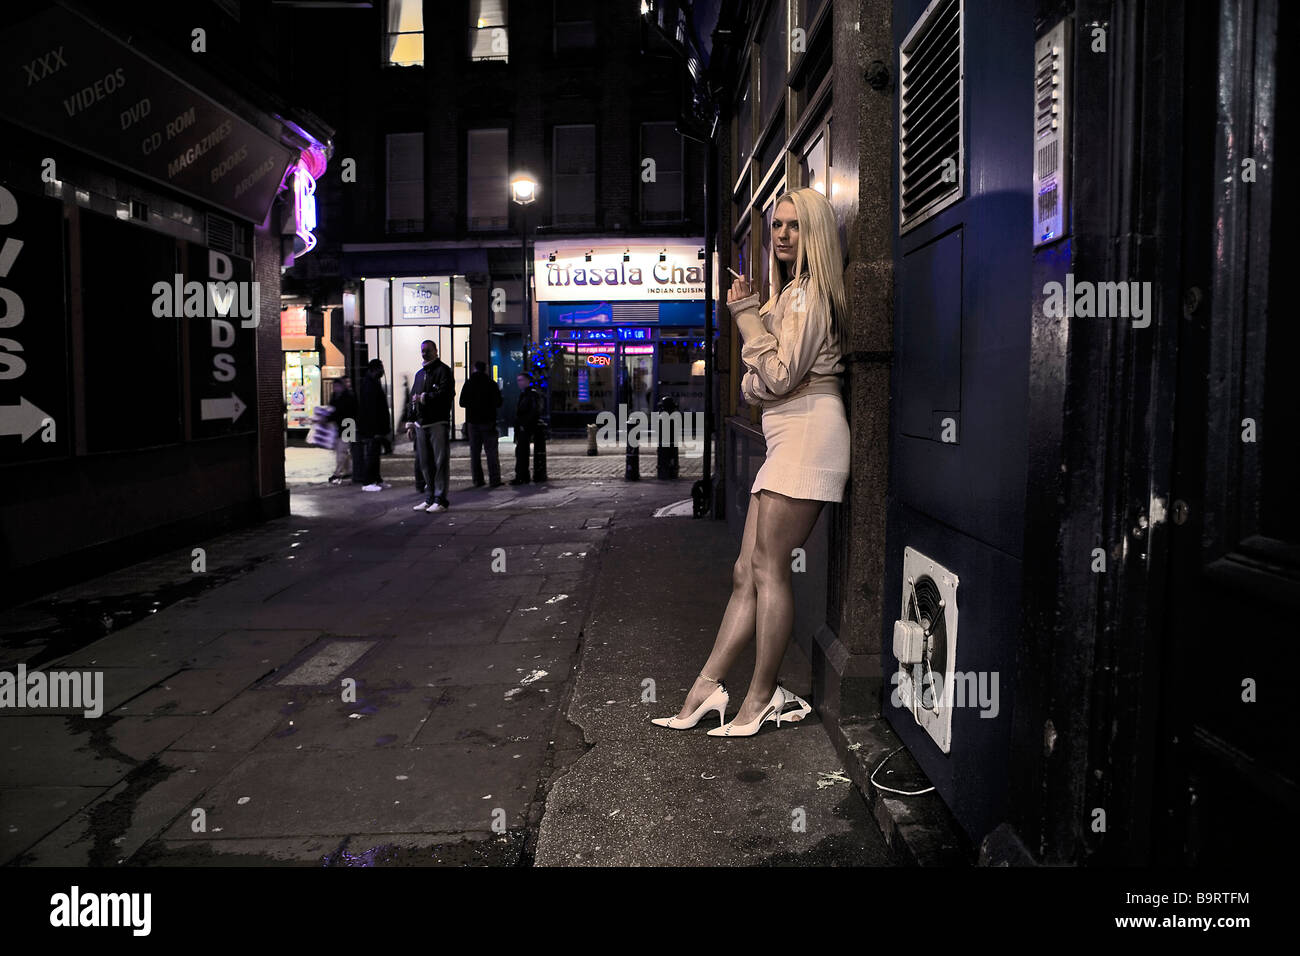 Working girl stands outside Soho London sex shop / strip joint Stock Photo 